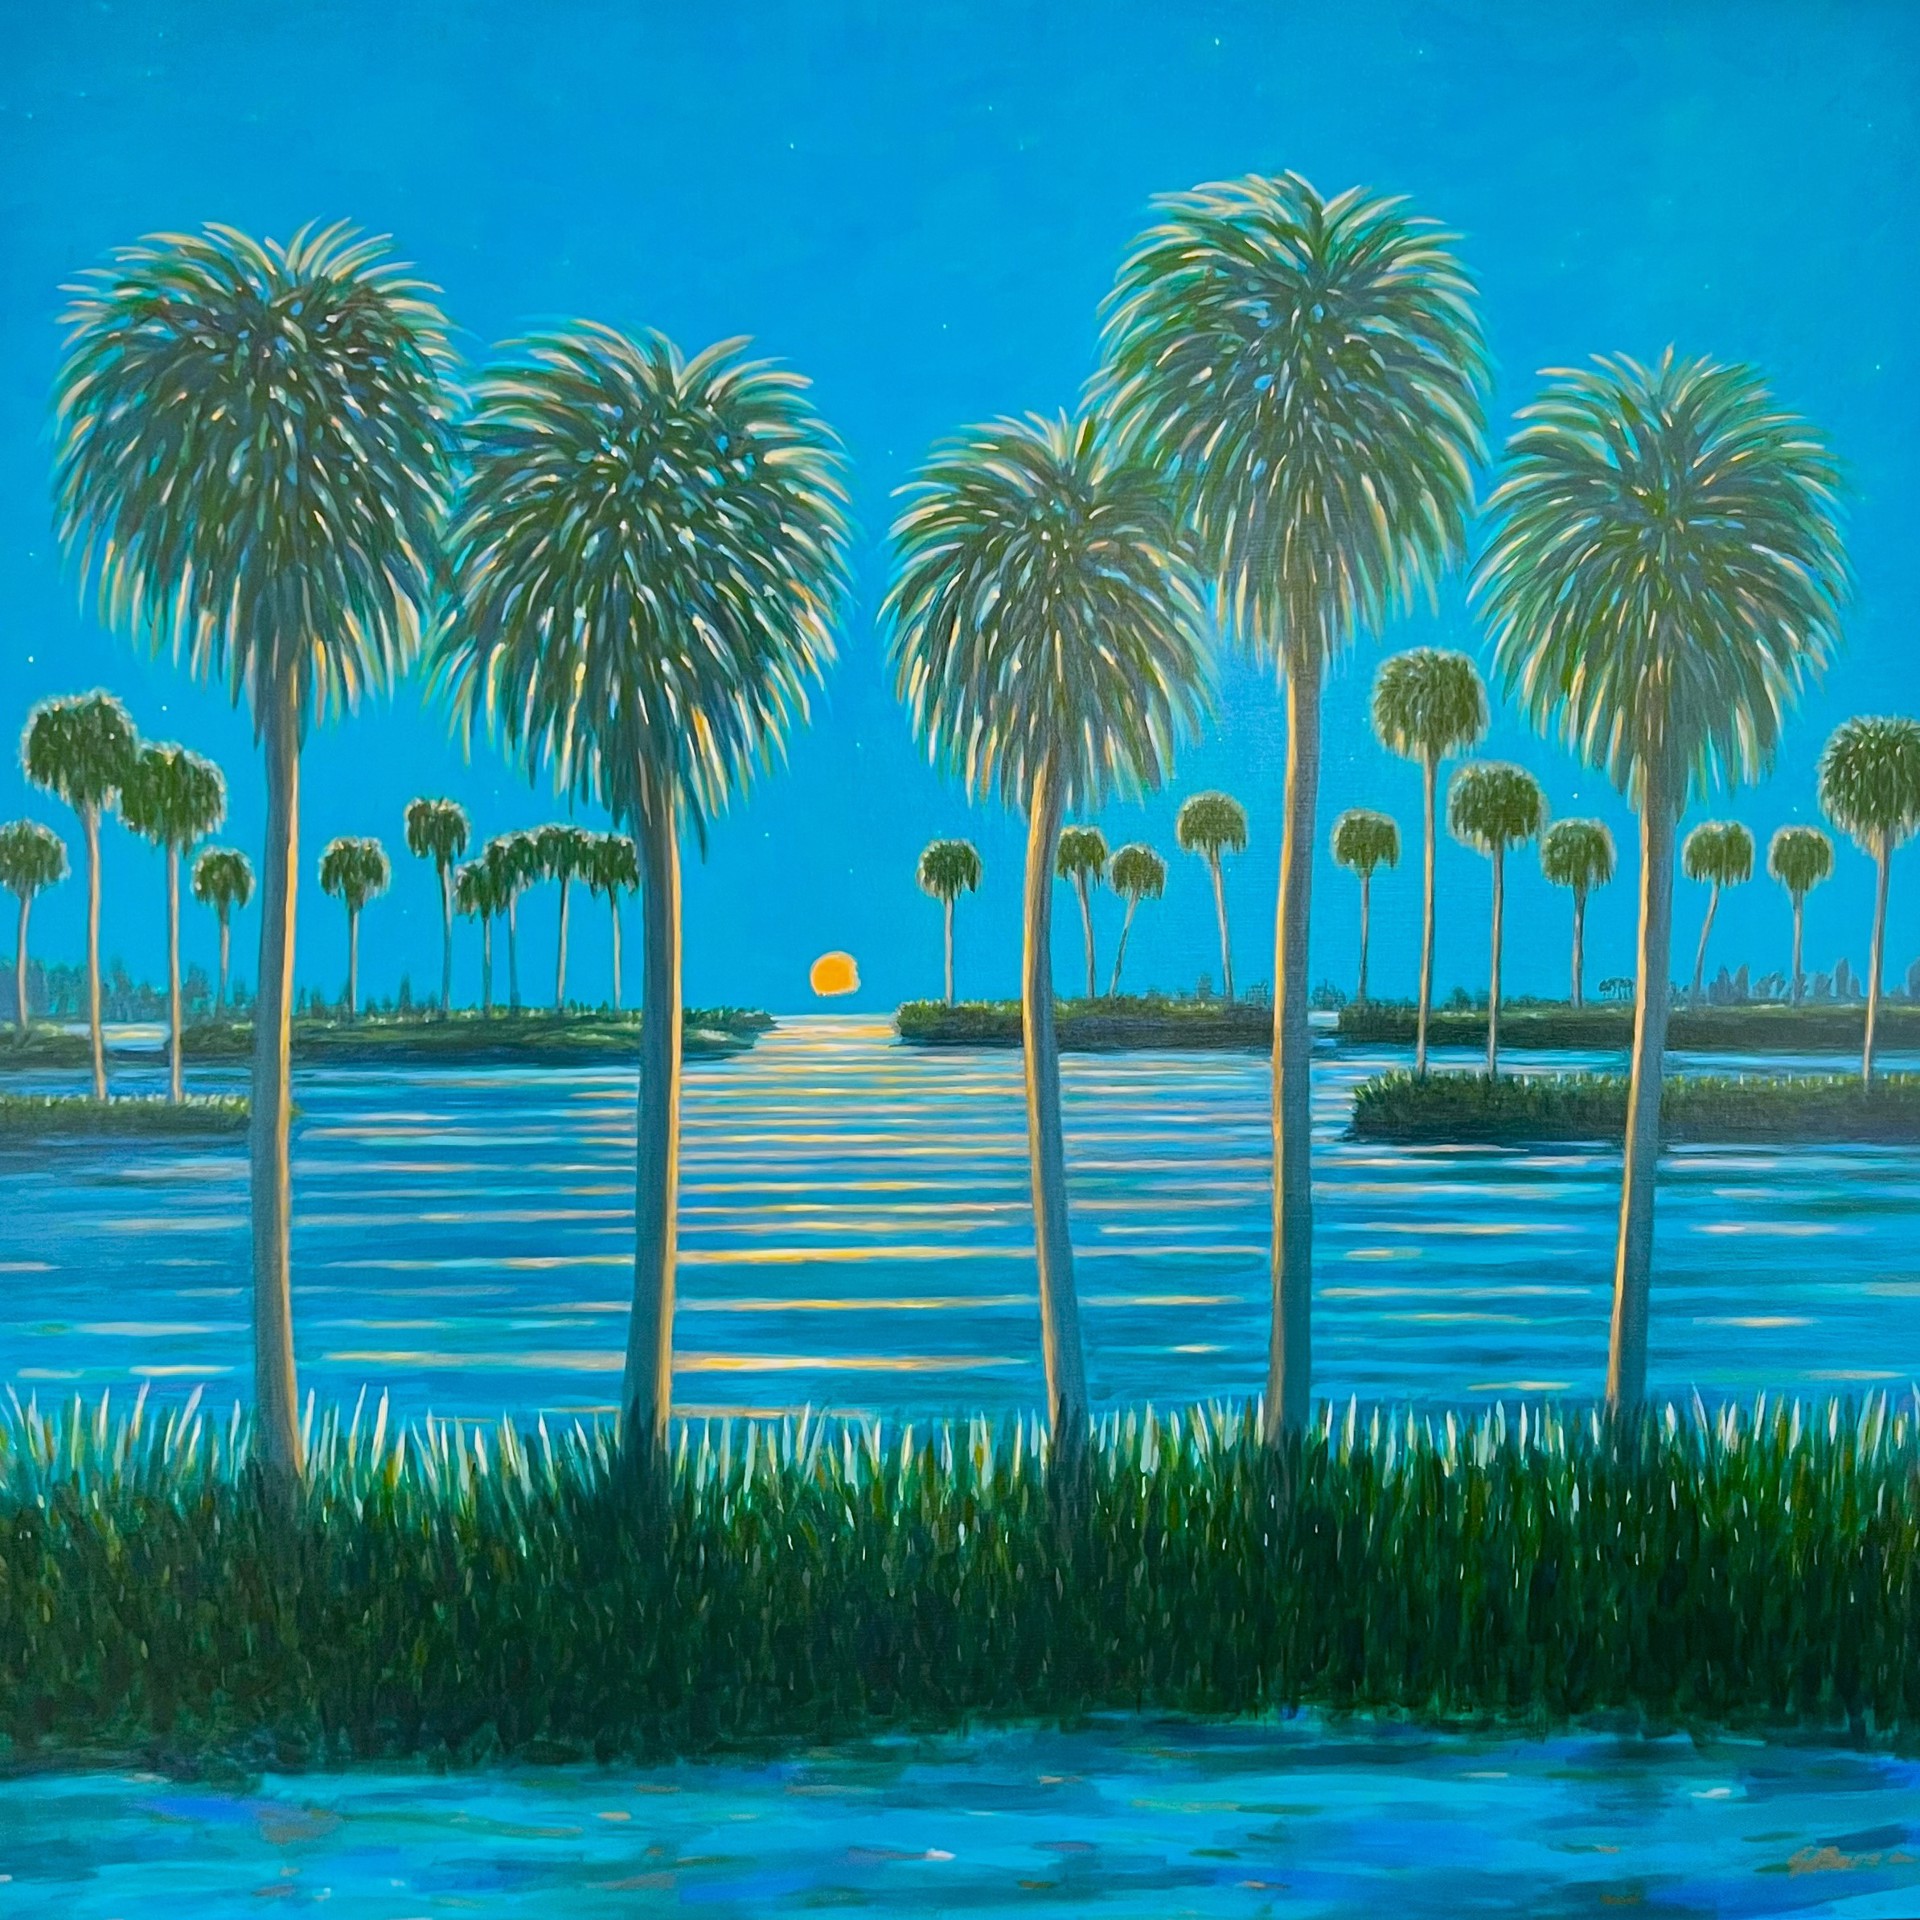 Waltz of the Palms by Gary Borse